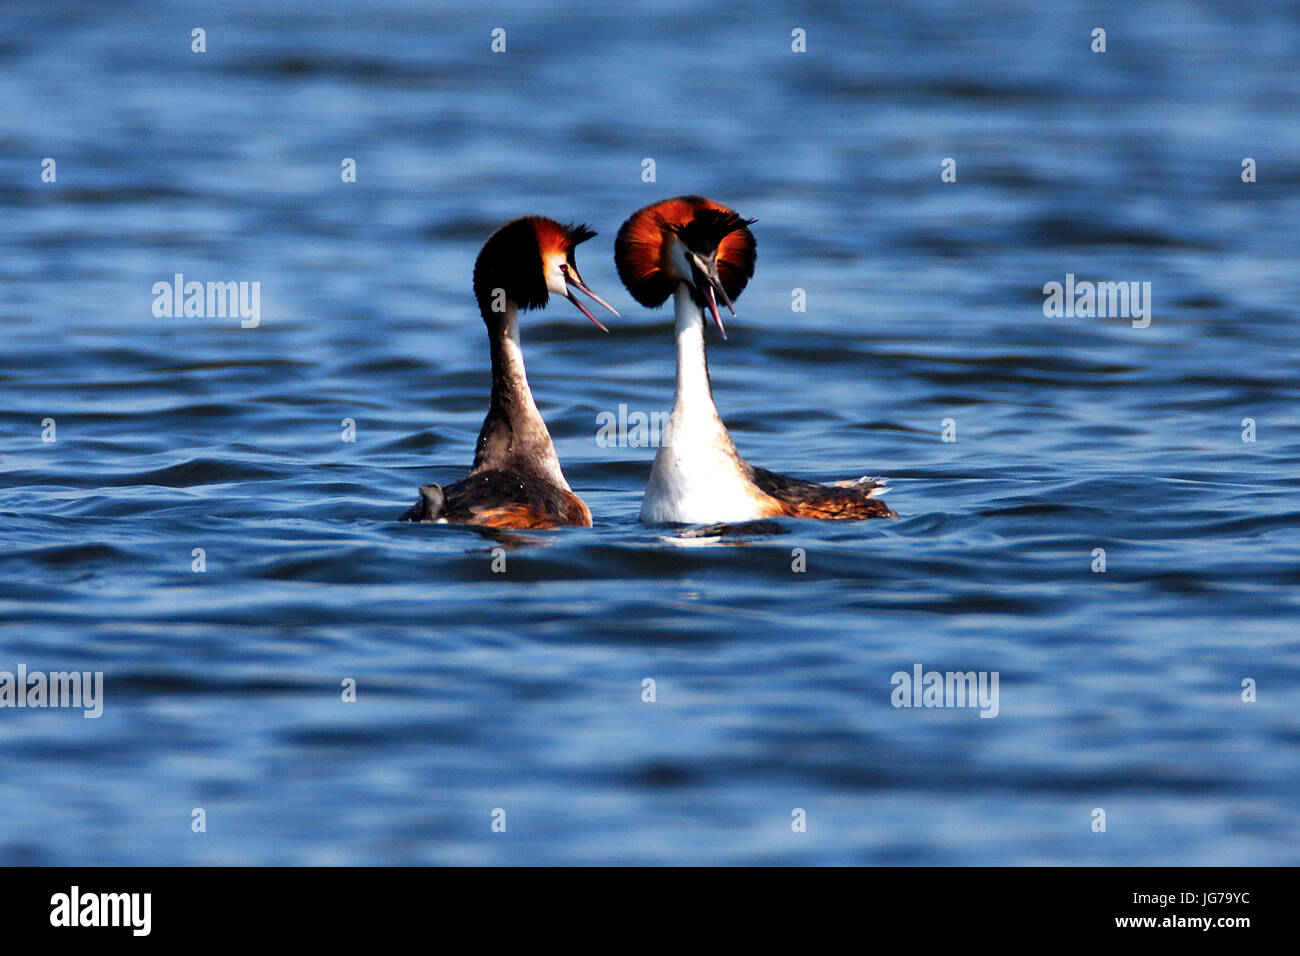 The great crested grebe mating dance on Crna Mlaka fishpond Stock Photo